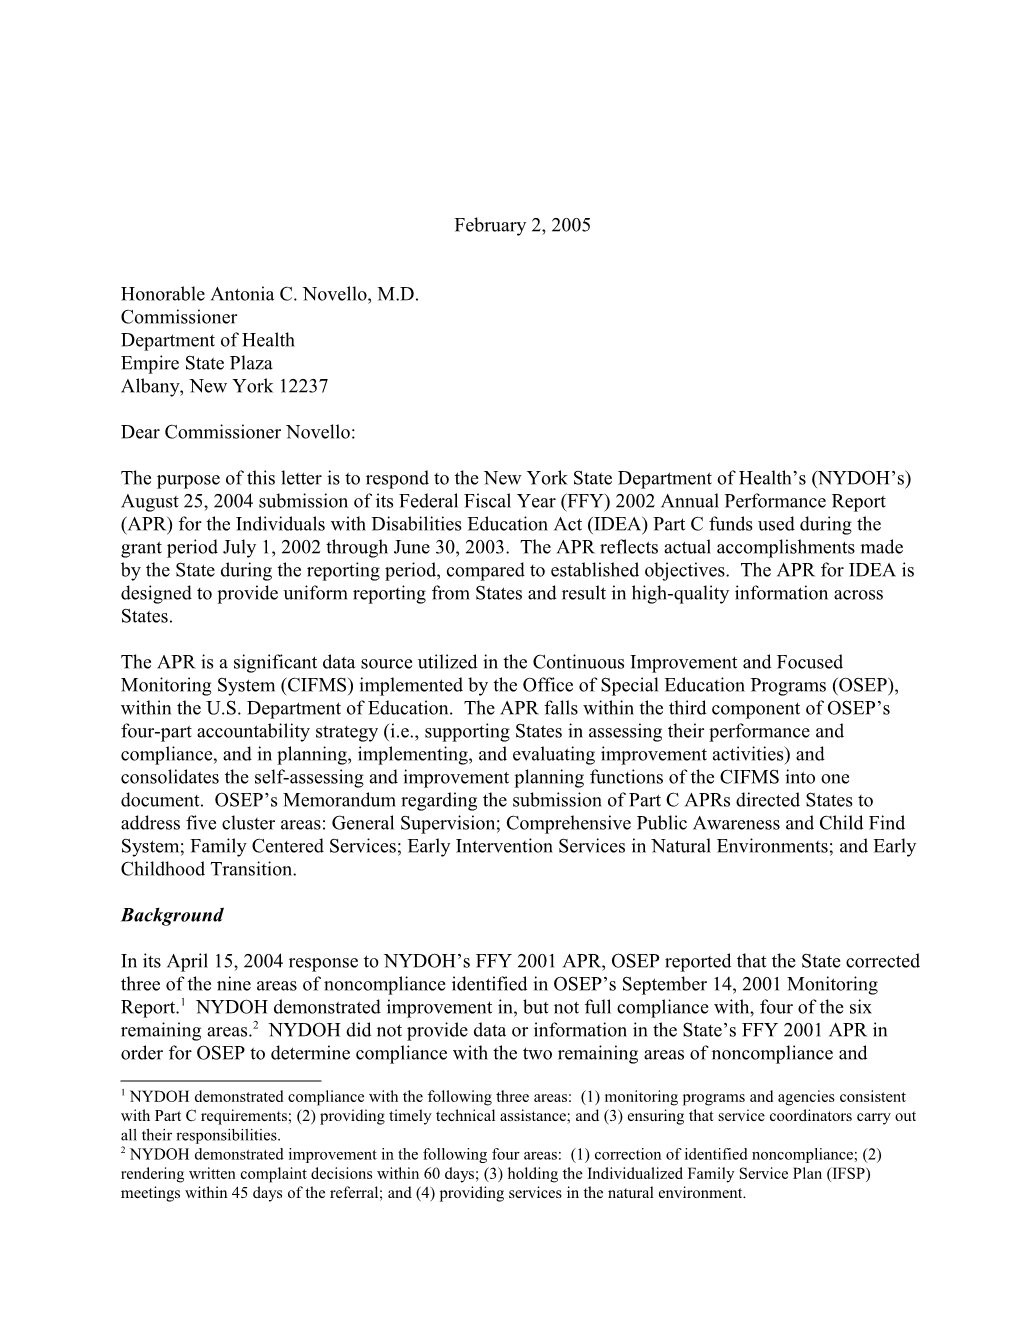 New York Part C APR Letter for Grant Year 2002-2003. (MS Word)